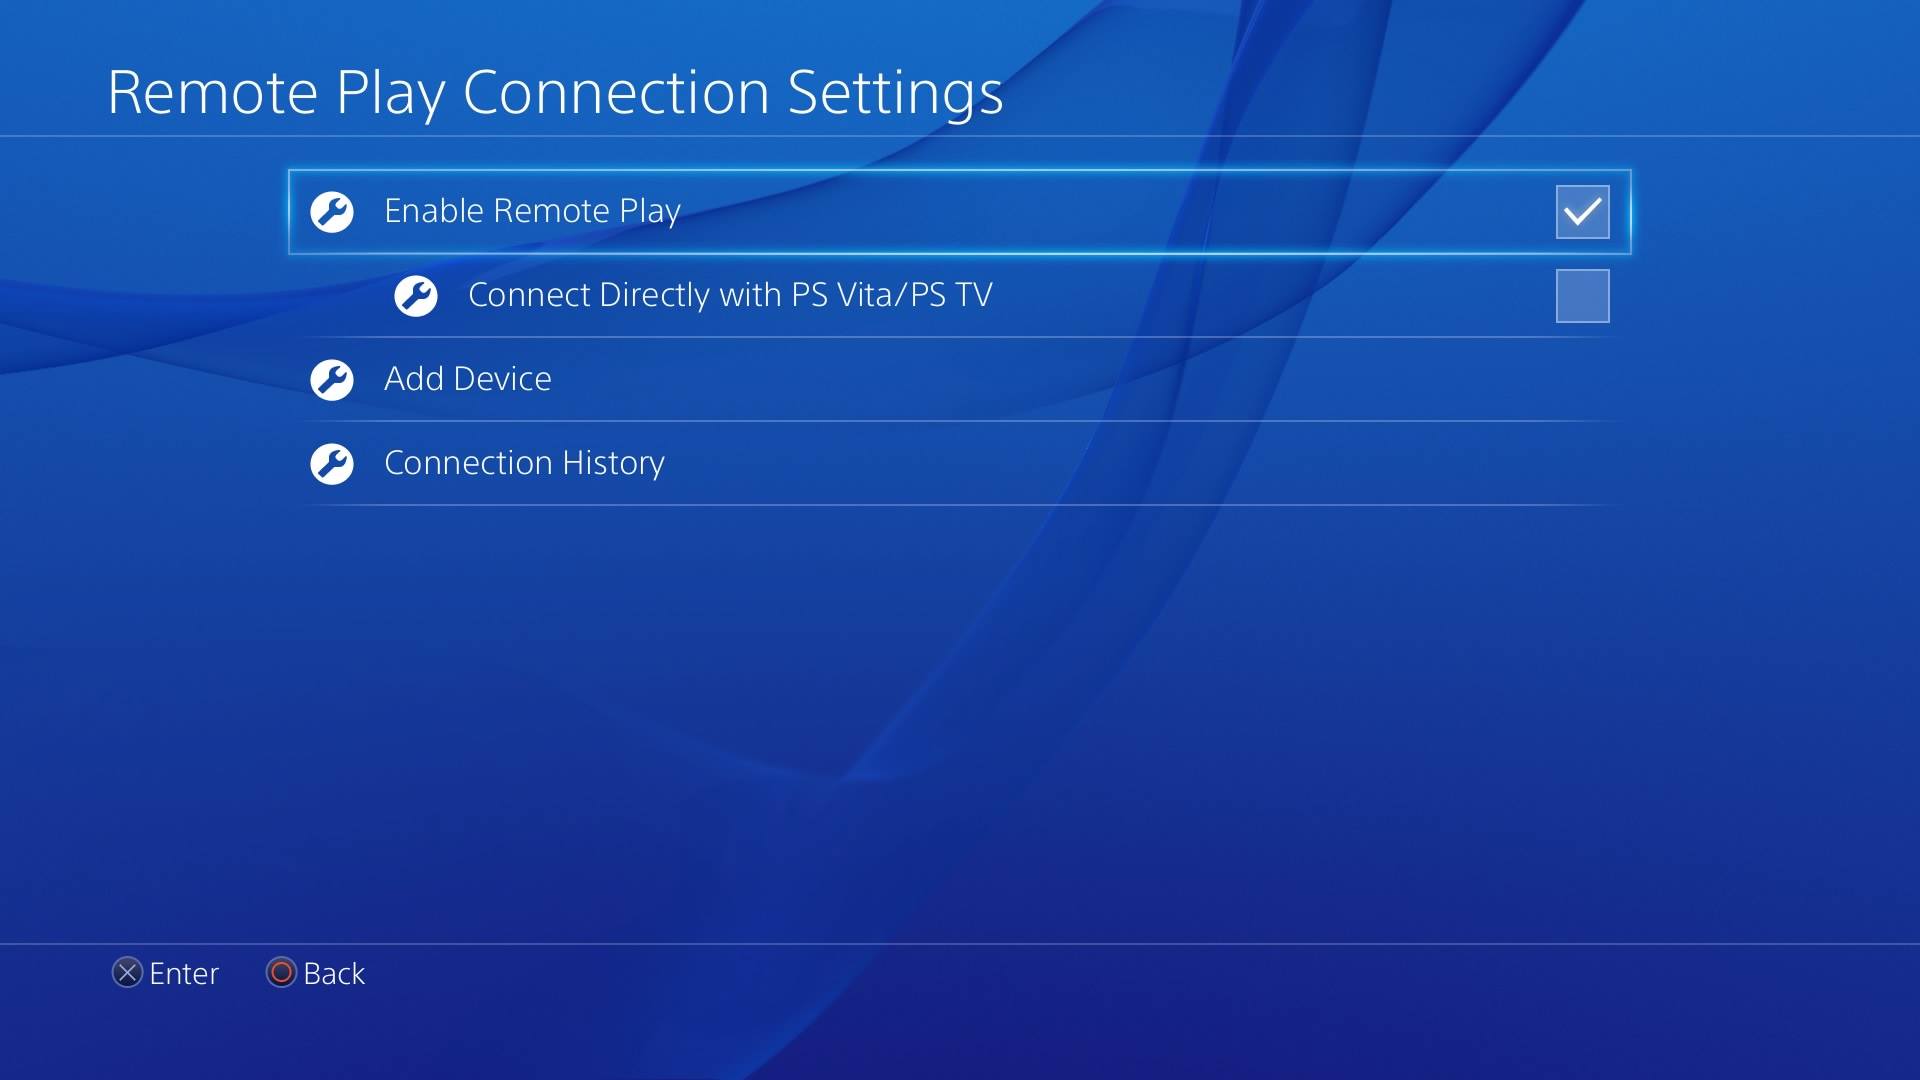 Enable Remote Play on your PS4 by going to "Settings" > "Remote Play Connection Settings" and ticking the box next to "Enable Remote Play".
Configure your PS4 for Remote Play by going to "Settings" > "Remote Play Connection Settings" > "Add Device" and following the on-screen instructions.